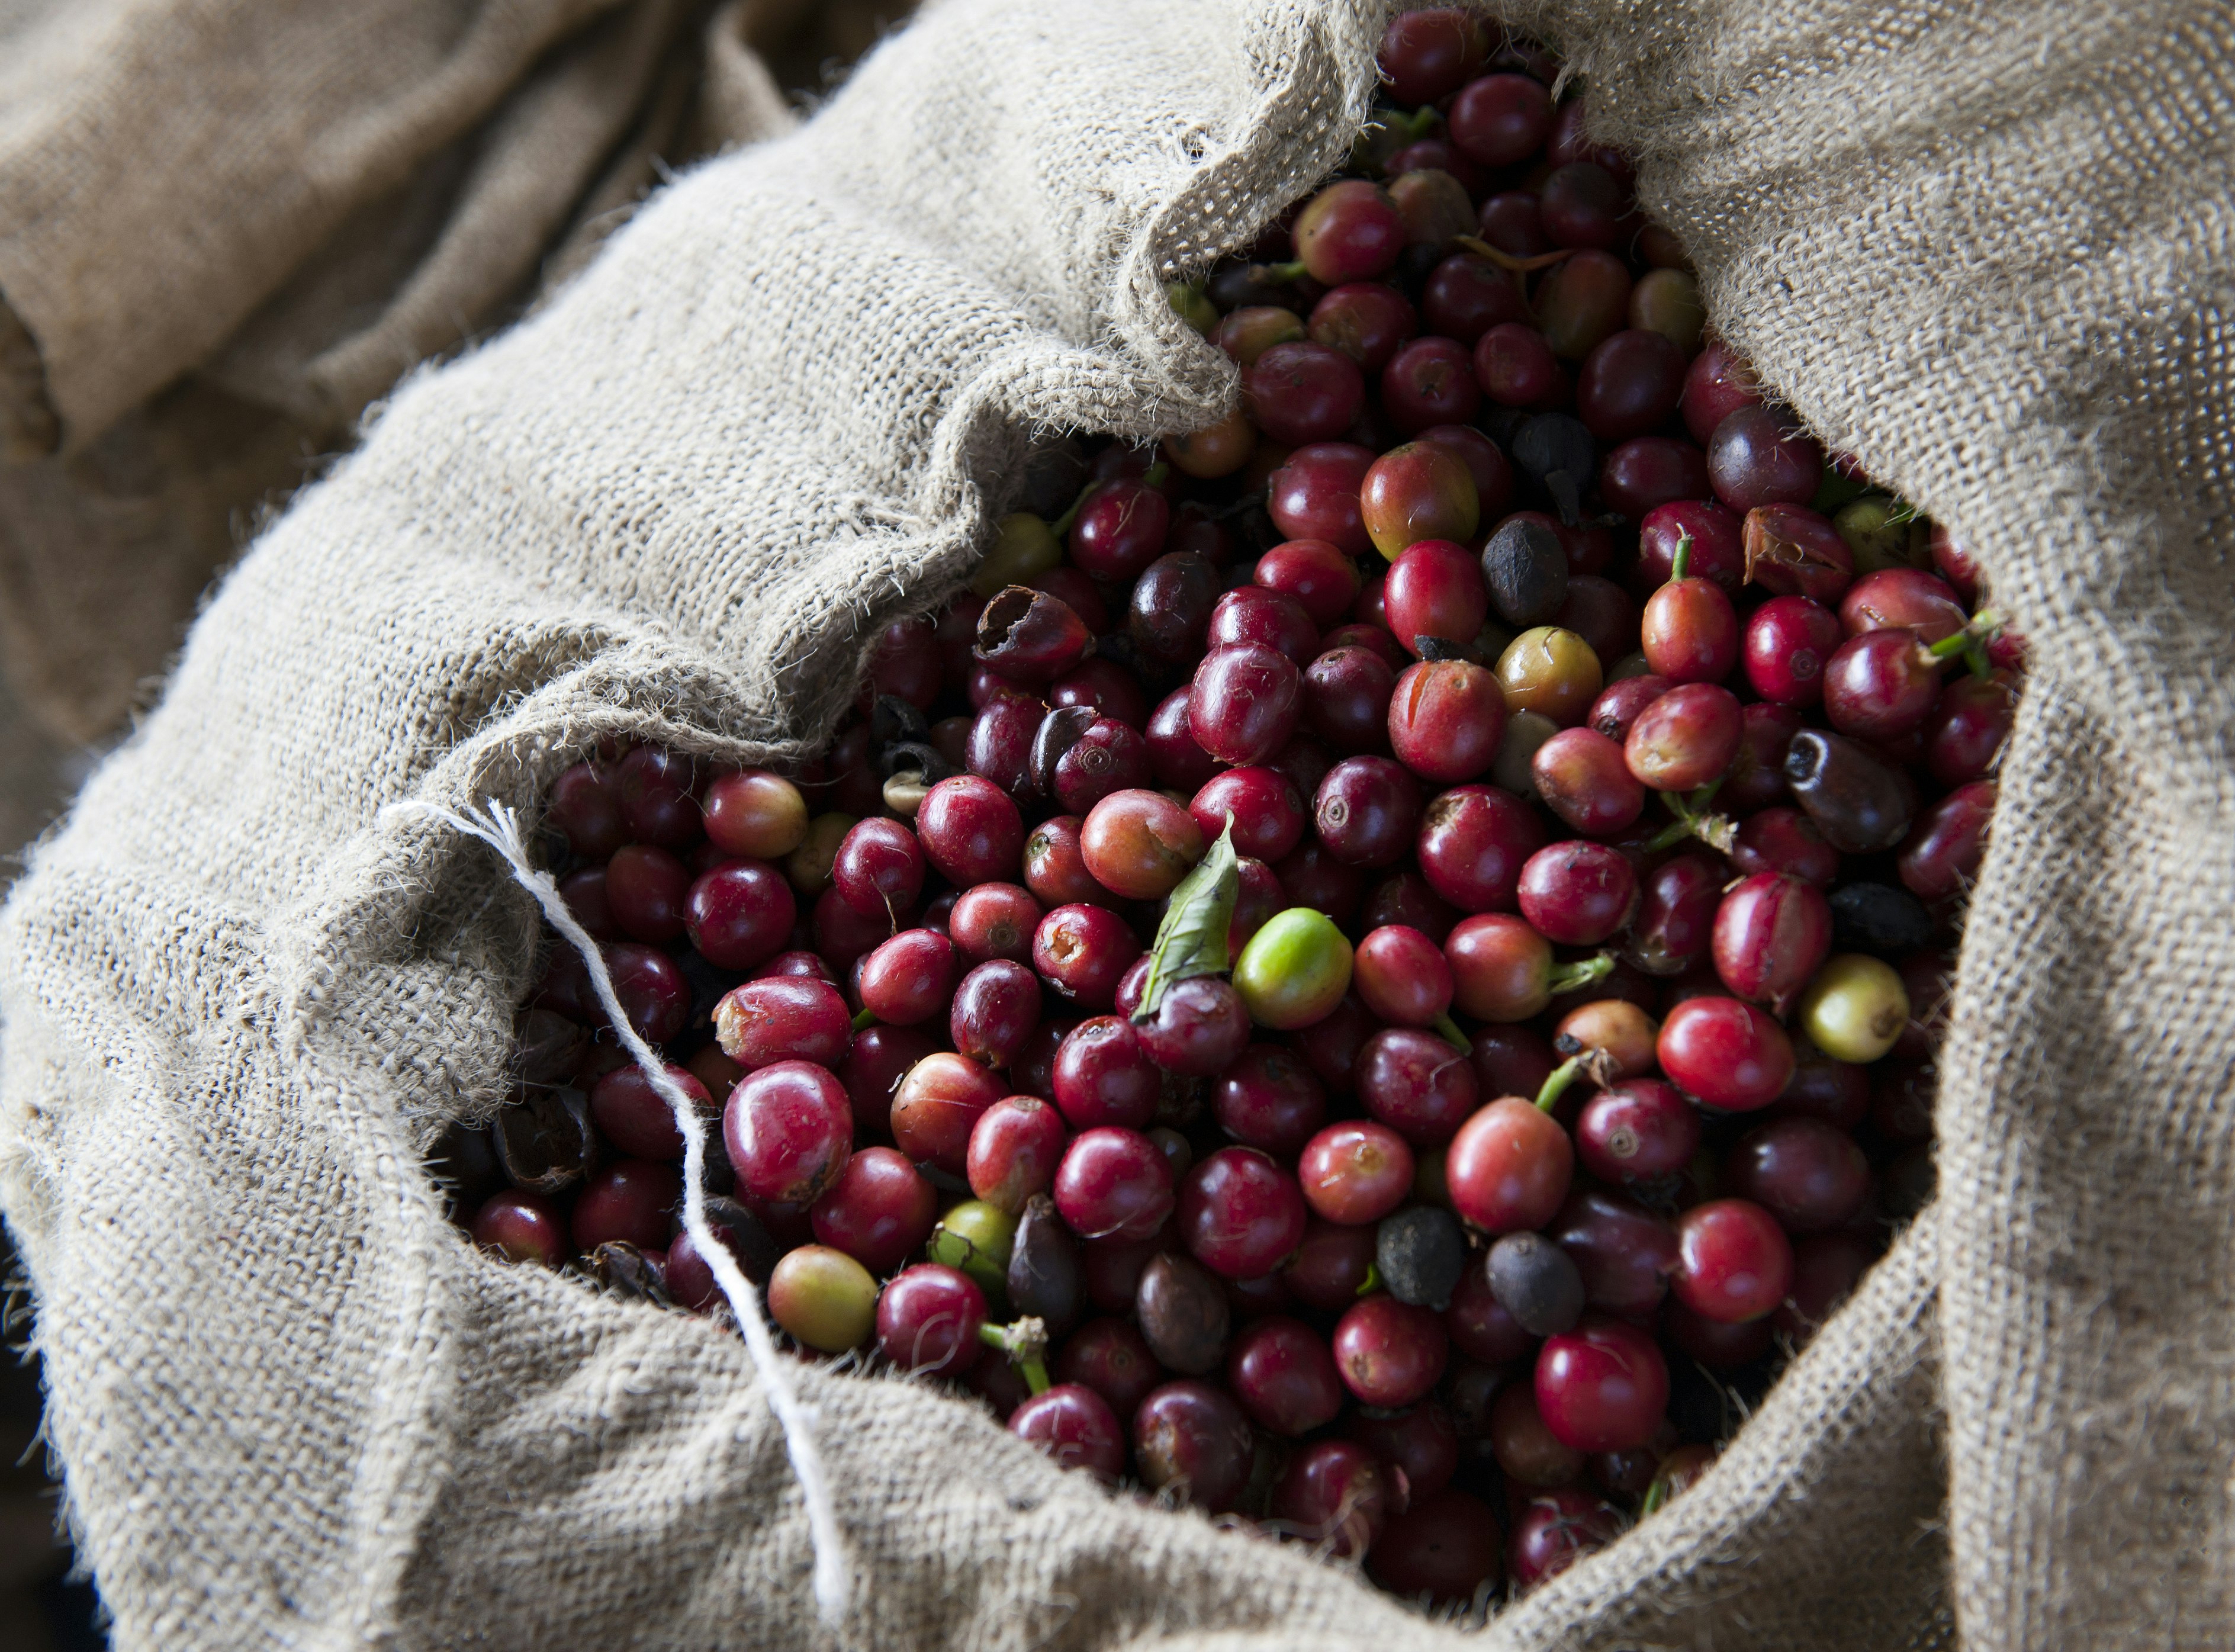 A burlap bag of Kona coffee beans in cherry form